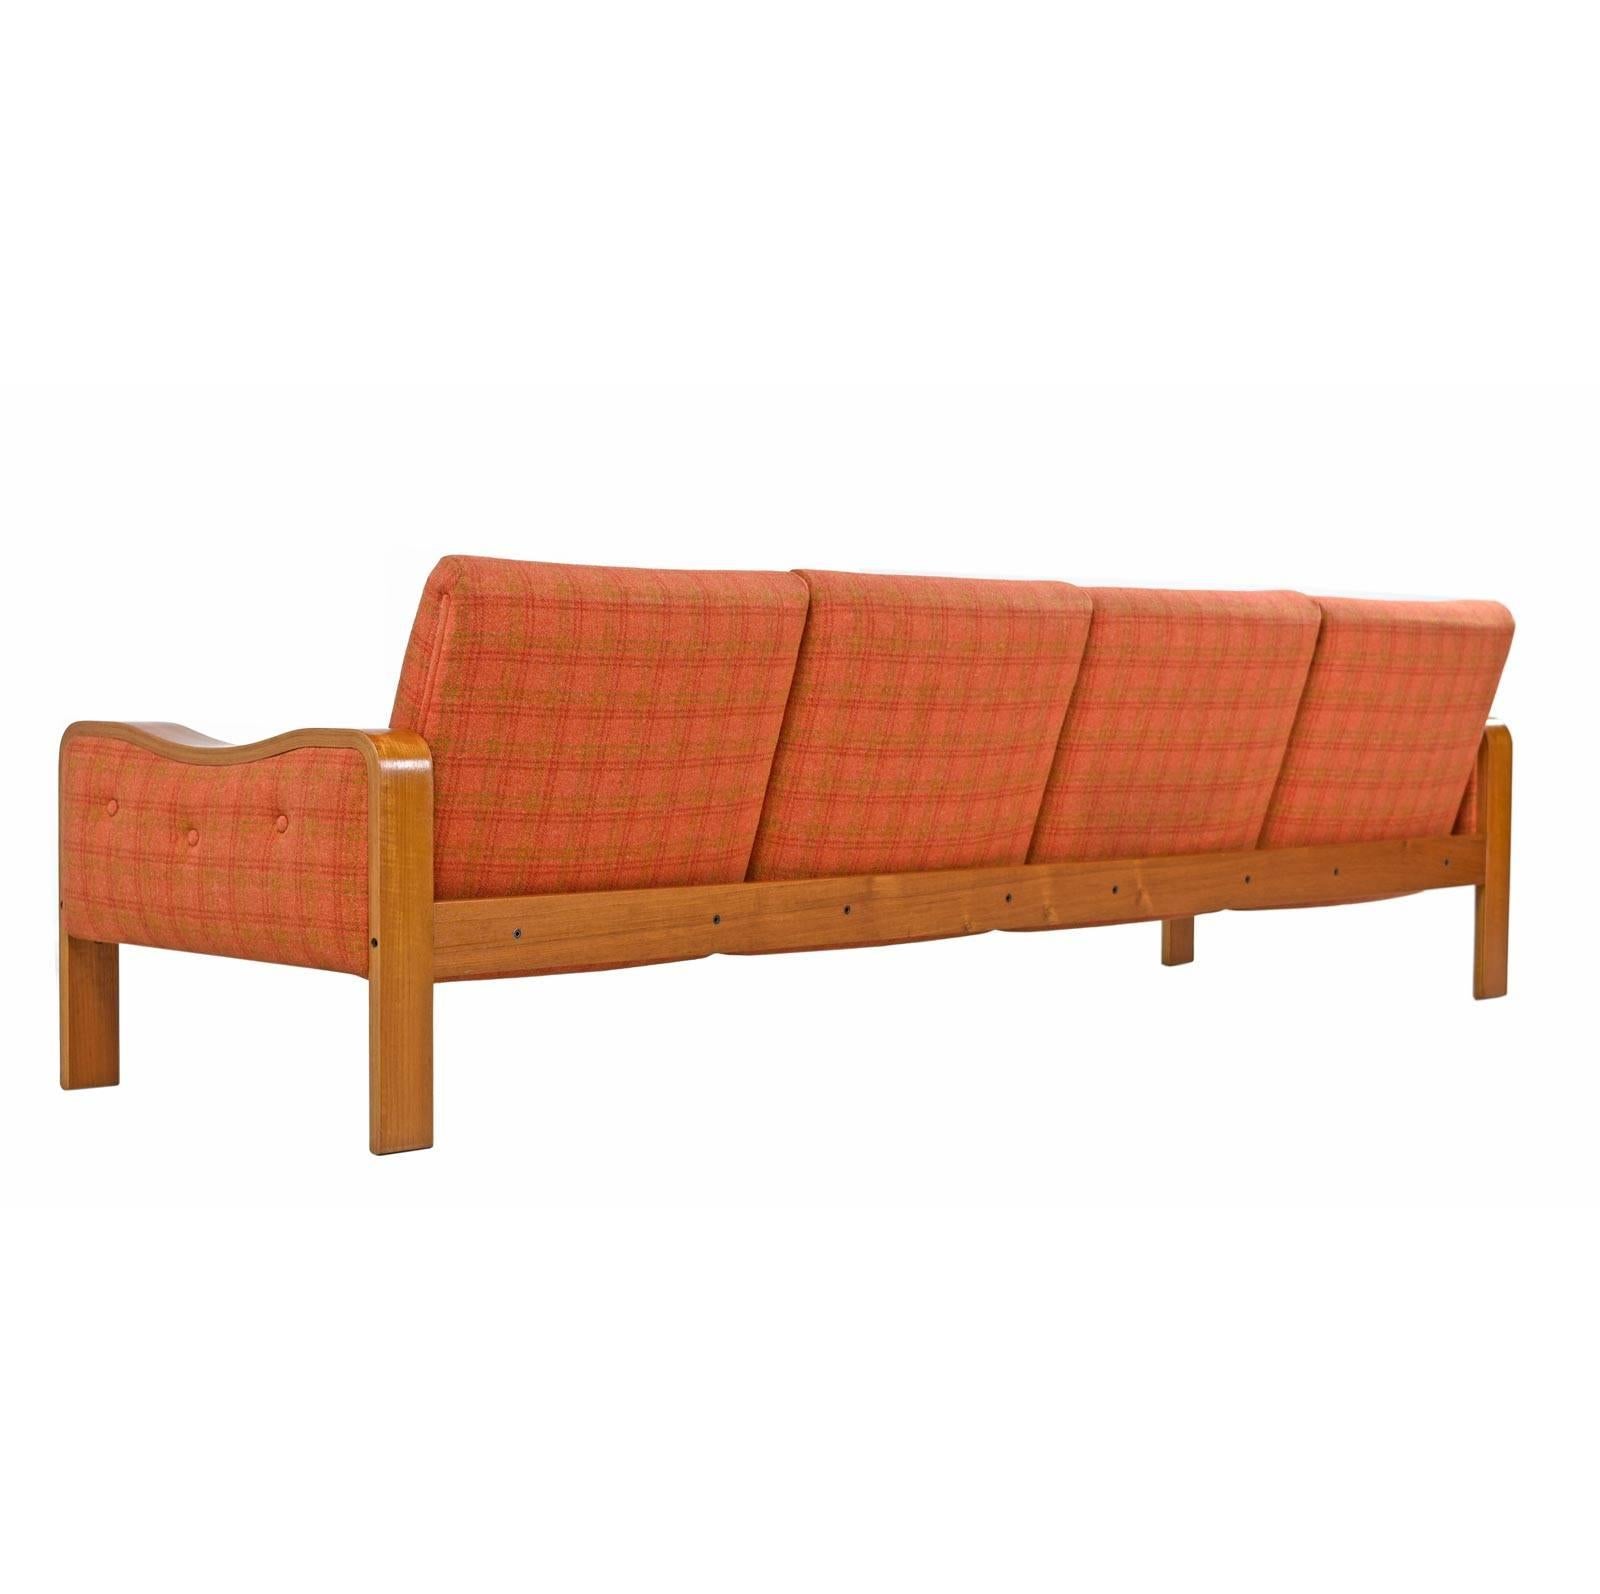 1970s couch